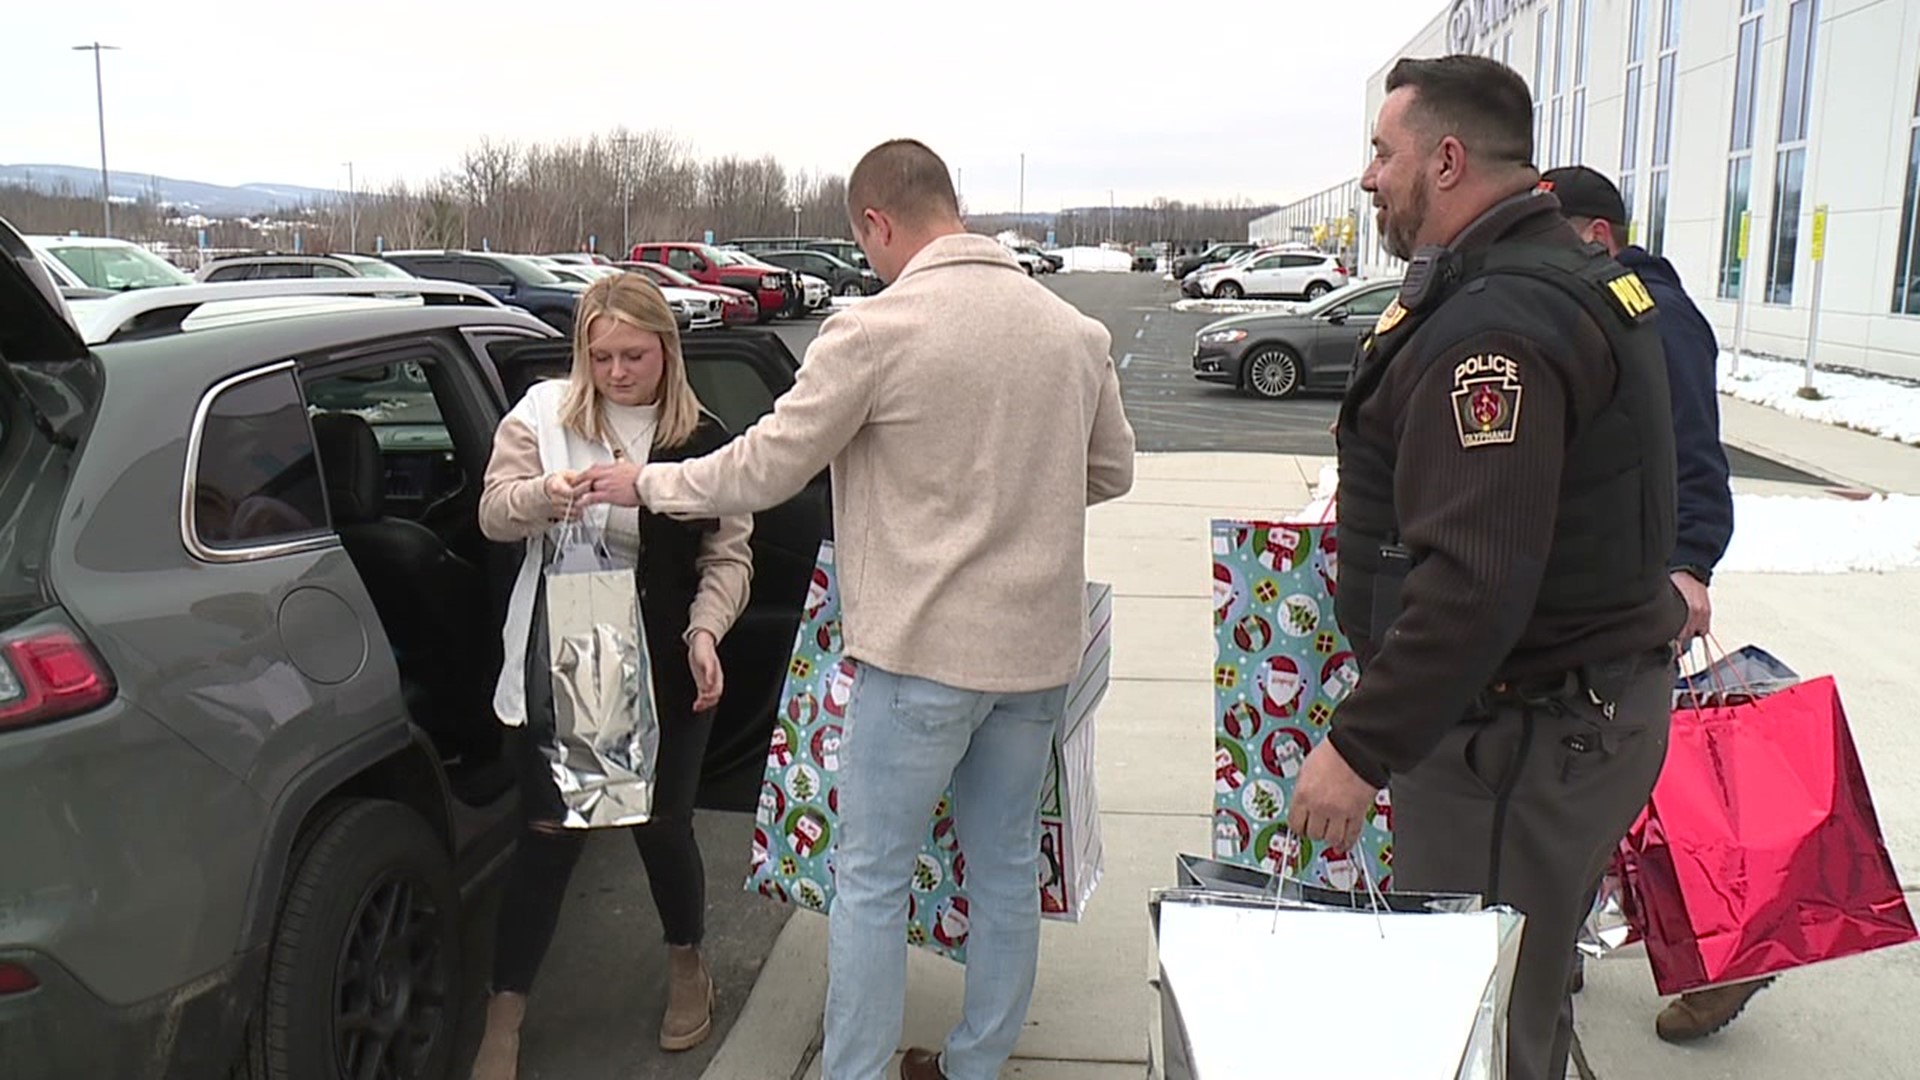 Some children will be getting something to keep them warm this winter, along with an additional surprise. Newswatch 16's Chelsea Strub has the story.